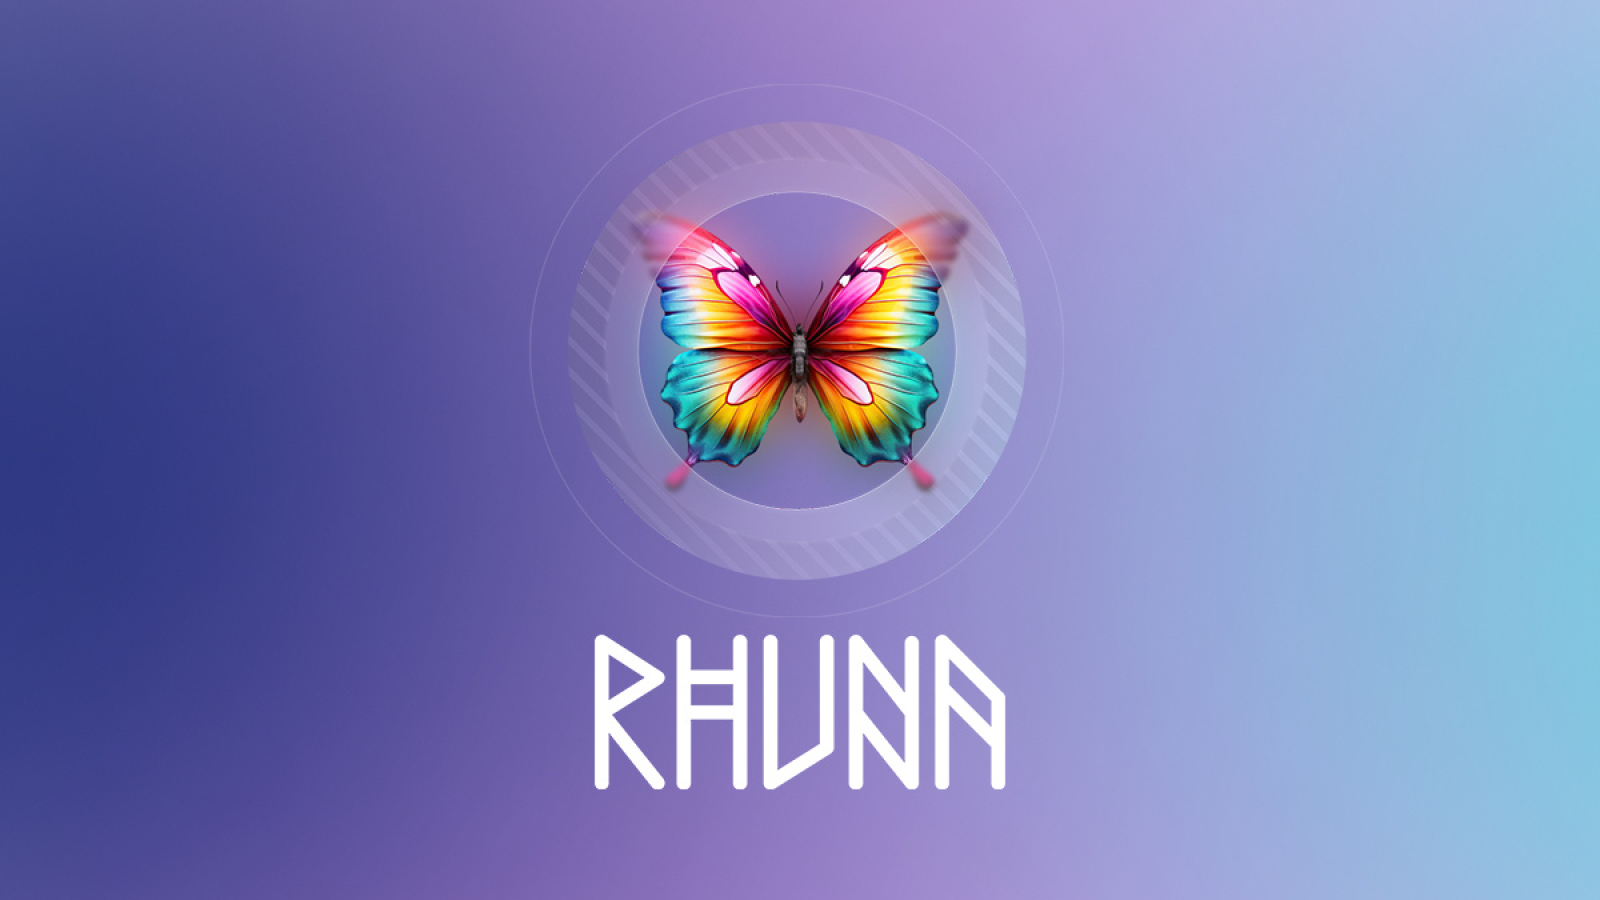 RHUNA Launches to Revolutionize the Events and Entertainment Industry with Fintech Innovation